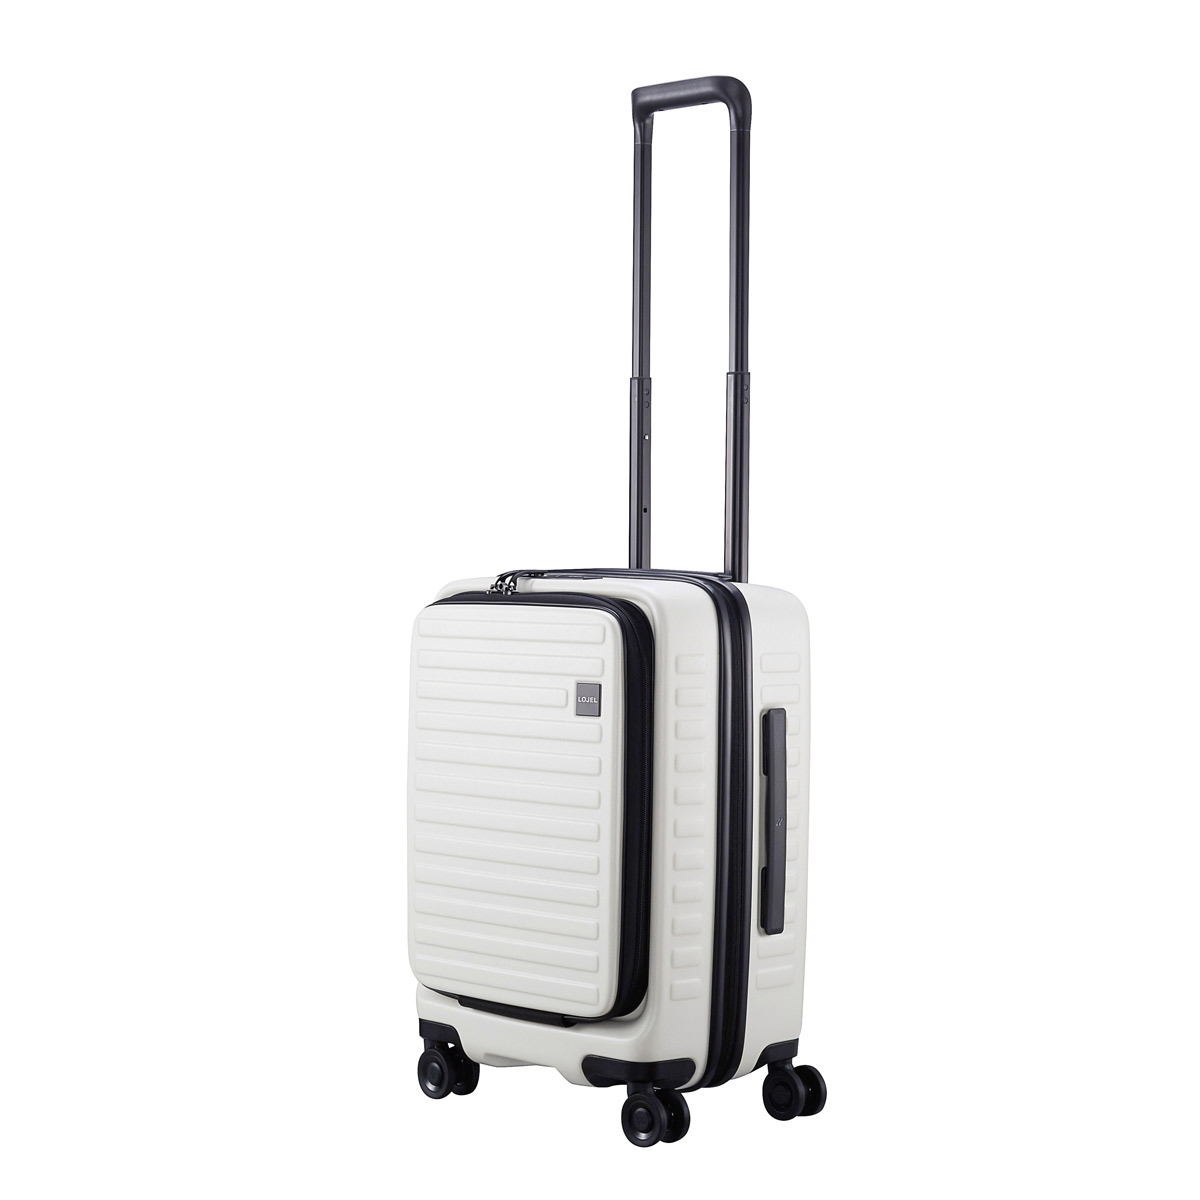 Lojel-Cubo-White-Front-Small-c44opy-1